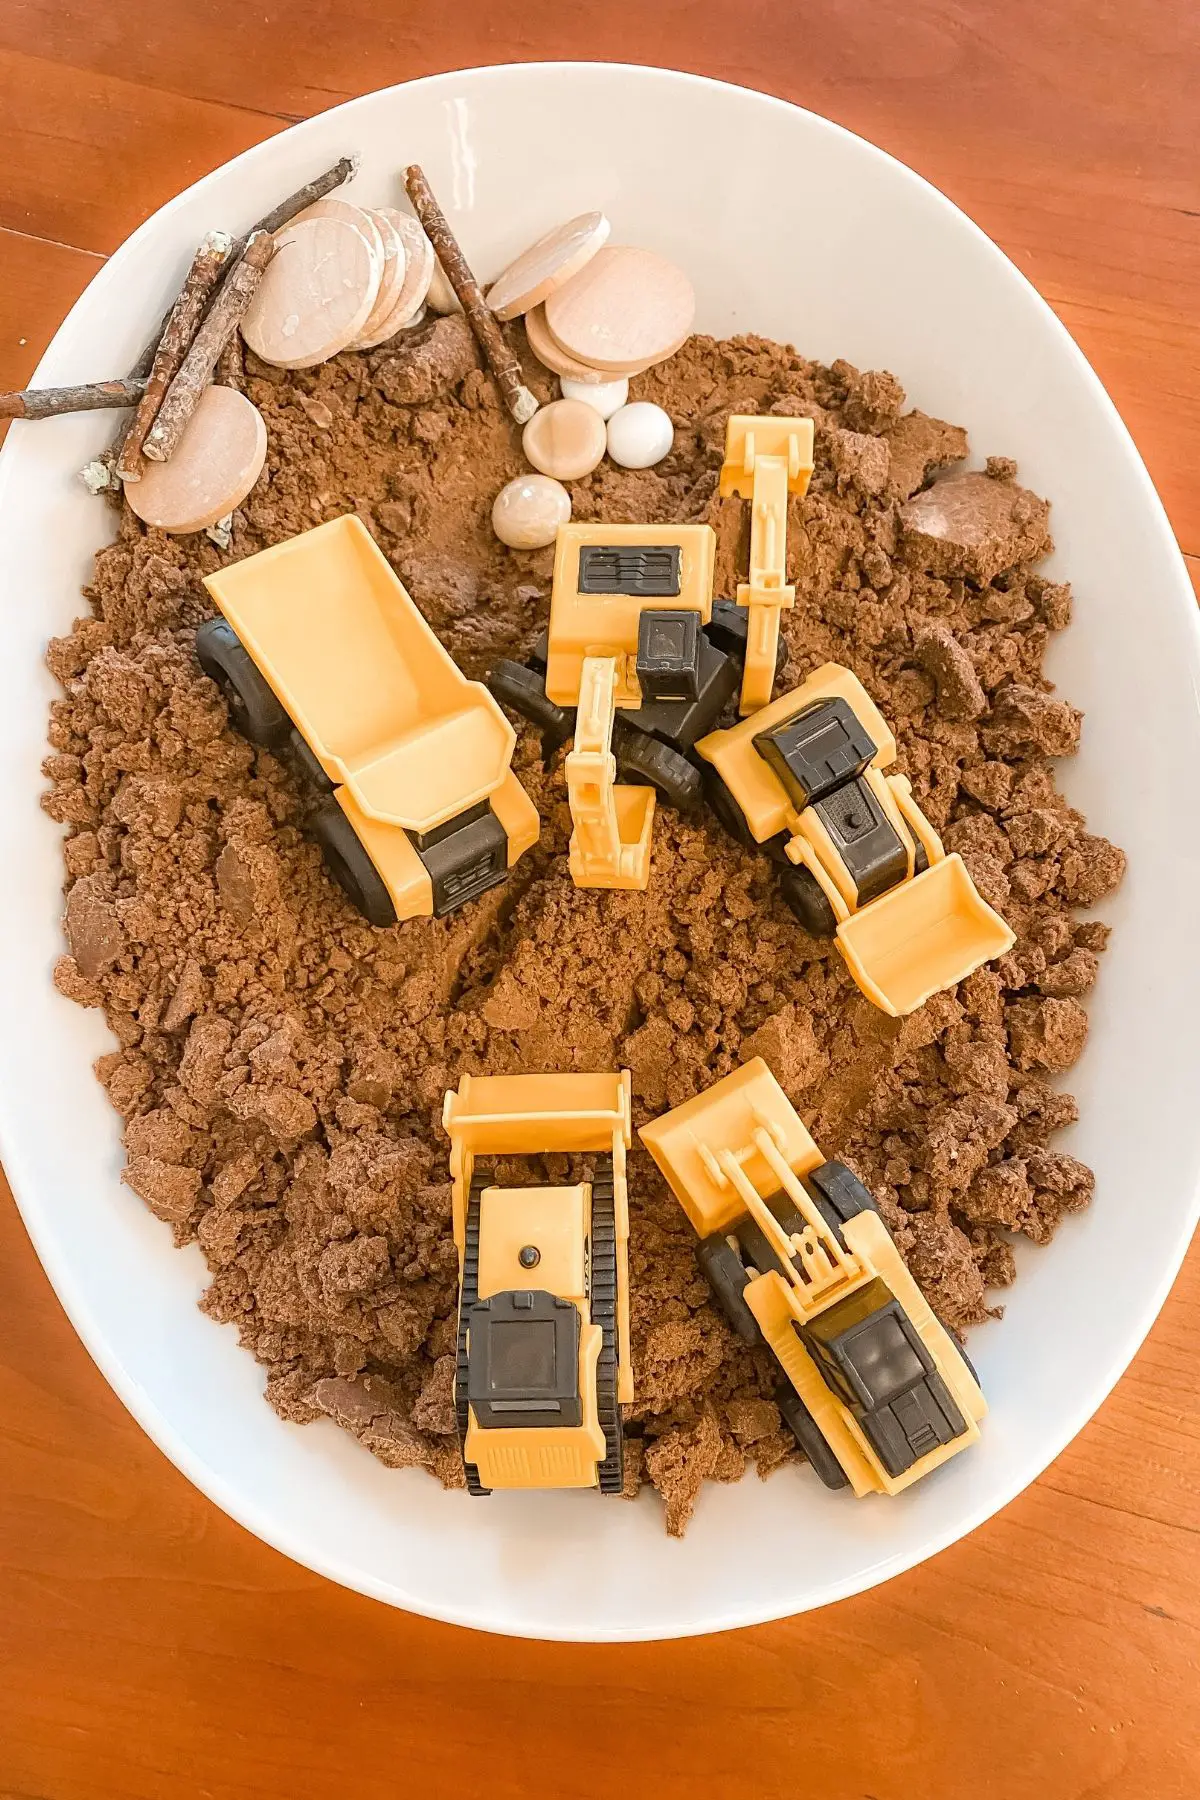 A tray of edible dirt for sensory play with mini construction vehicles, rocks, and sticks.